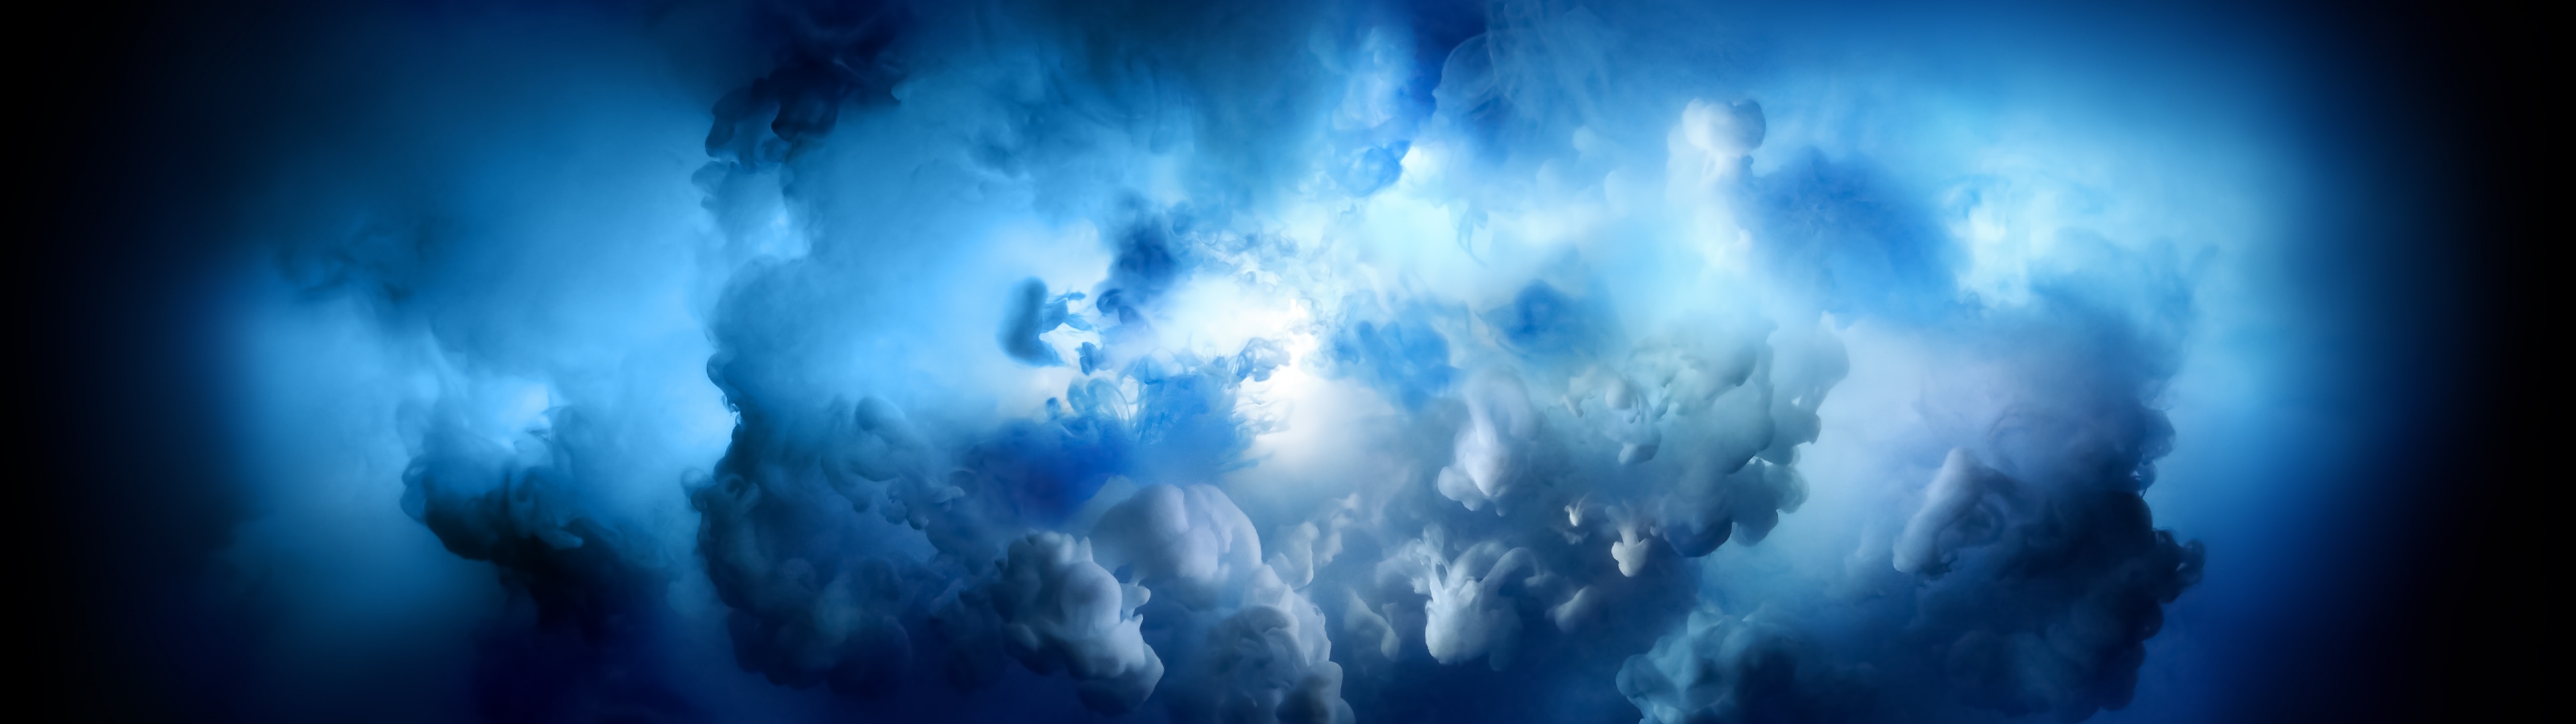 Storm Wallpaper 4k Clouds Blue Imac Pro Stock 5k Abstract 4025